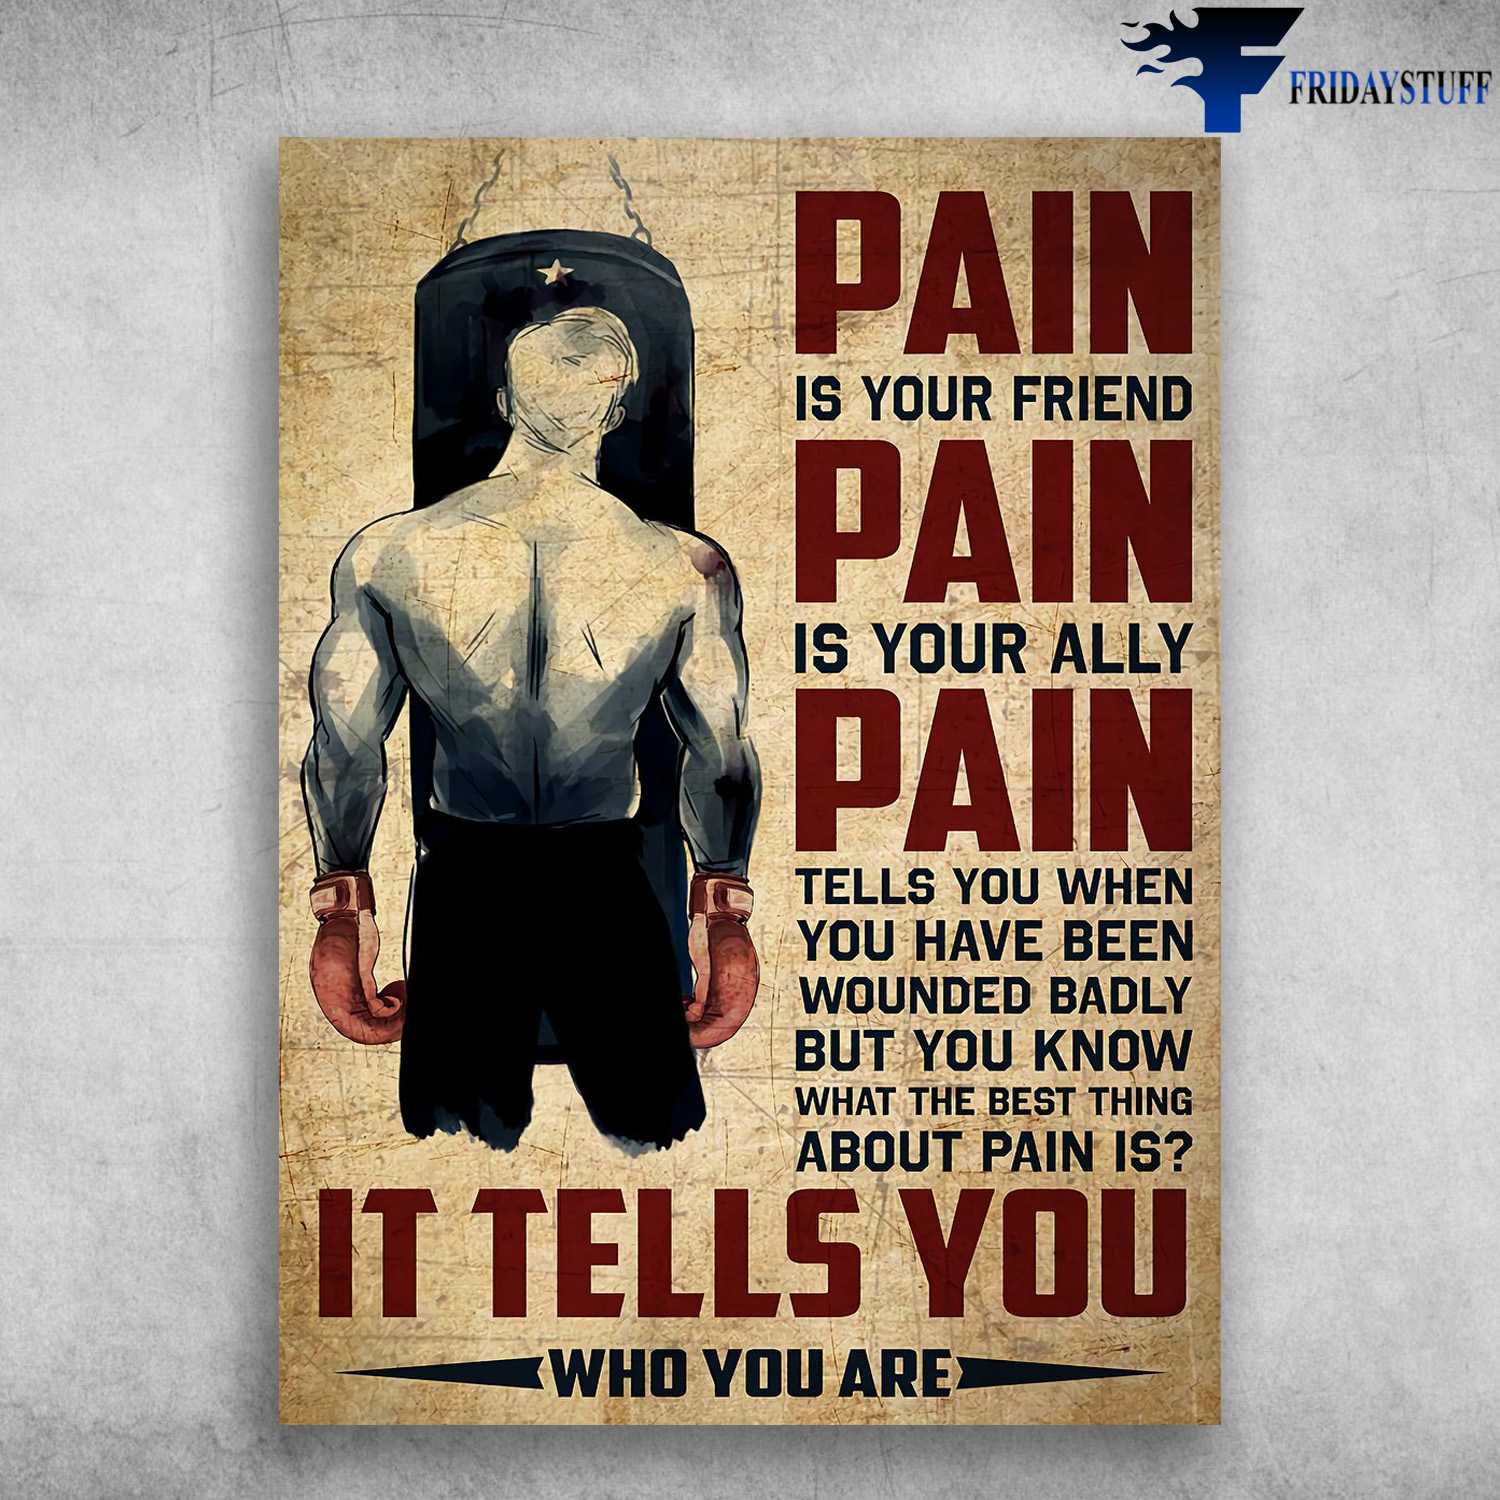 Boxing Man - Pain Is Your Friend, Pain Is Your Ally, Pain Tells You When You Have Been Wounder Badly, But You Know The Besthing About Pain Is, It Tells You Who You Are